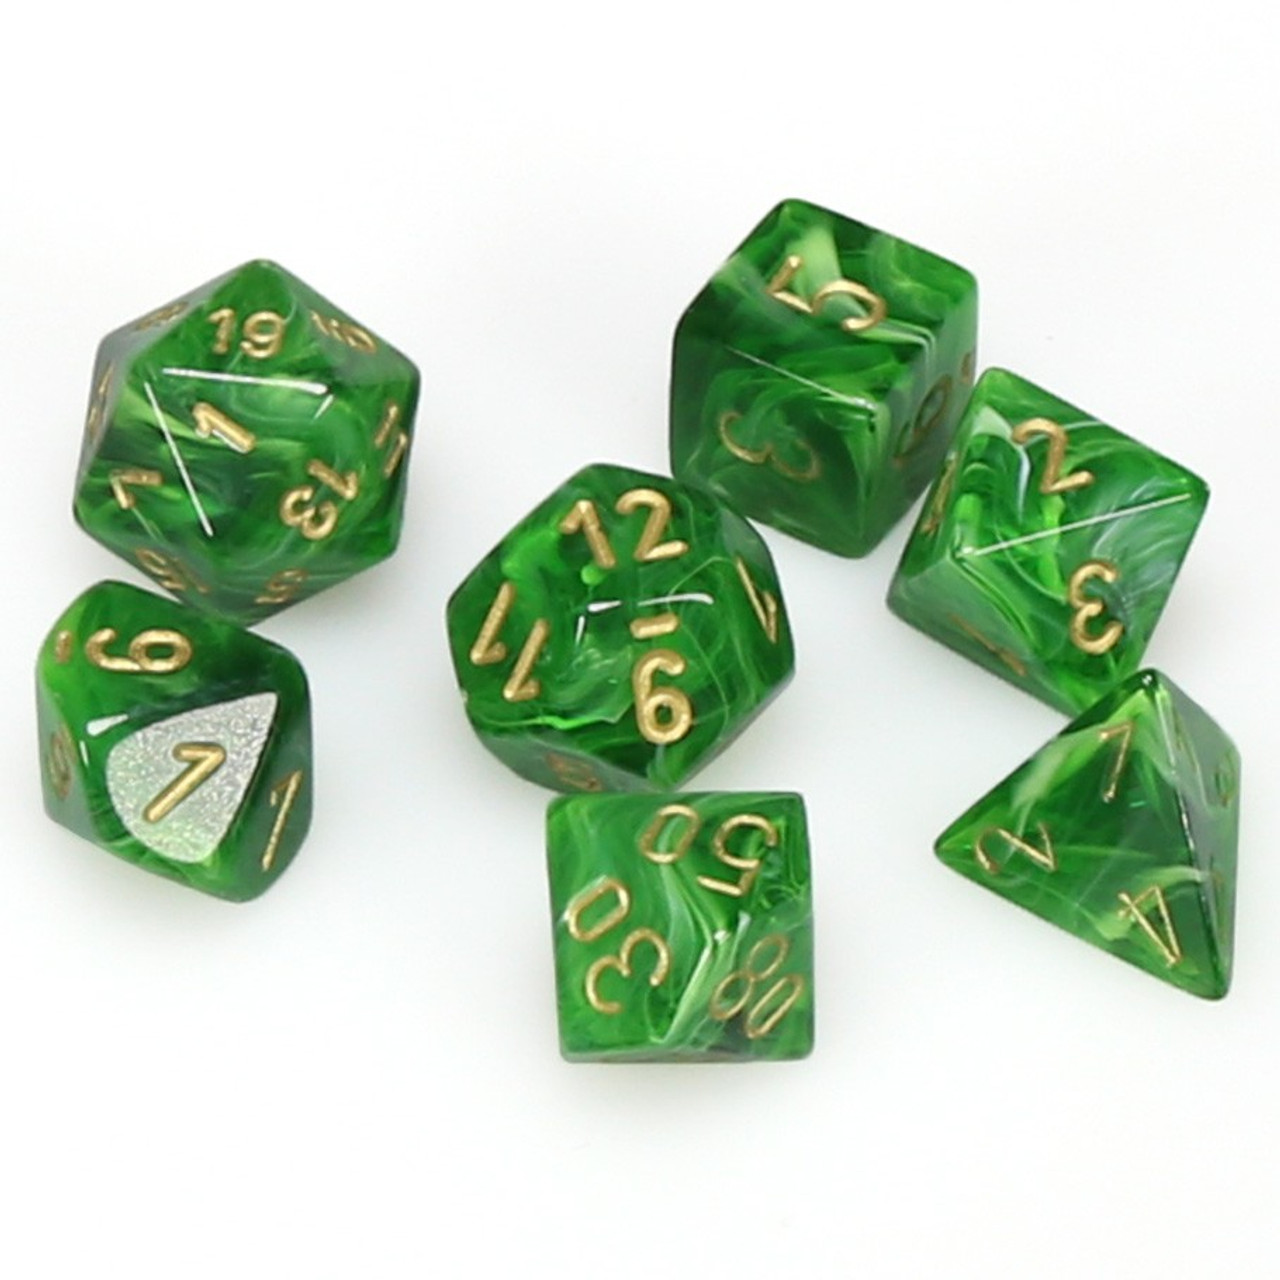 NEW 5 Transparent Green RPG Bunco Gaming Dice Set 16mm D6 Great Home Casino 